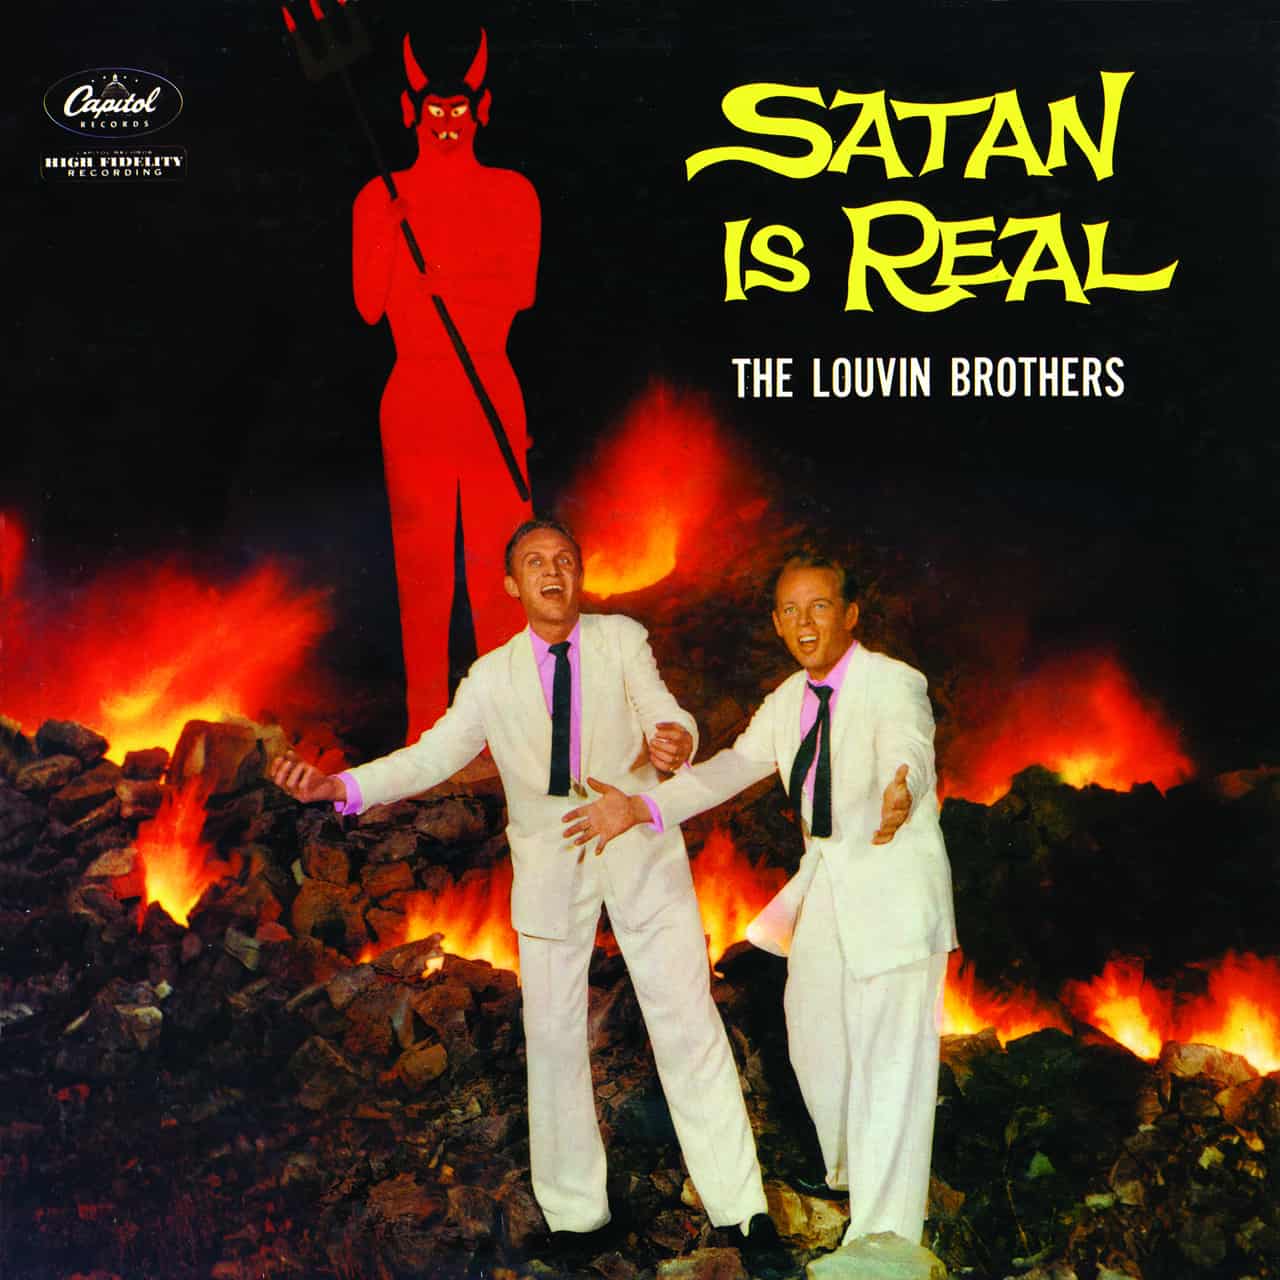 The cover of "Satan is Real" by the Louvin Brothers. The brothers are depicted standing in a fiery rockpile, singing passionately, arms outstretched in front of a crappy cardboard figure of a buck-toothed, pitchfork-holding Satan. The title is pictured in bright yellow, stylized letters.